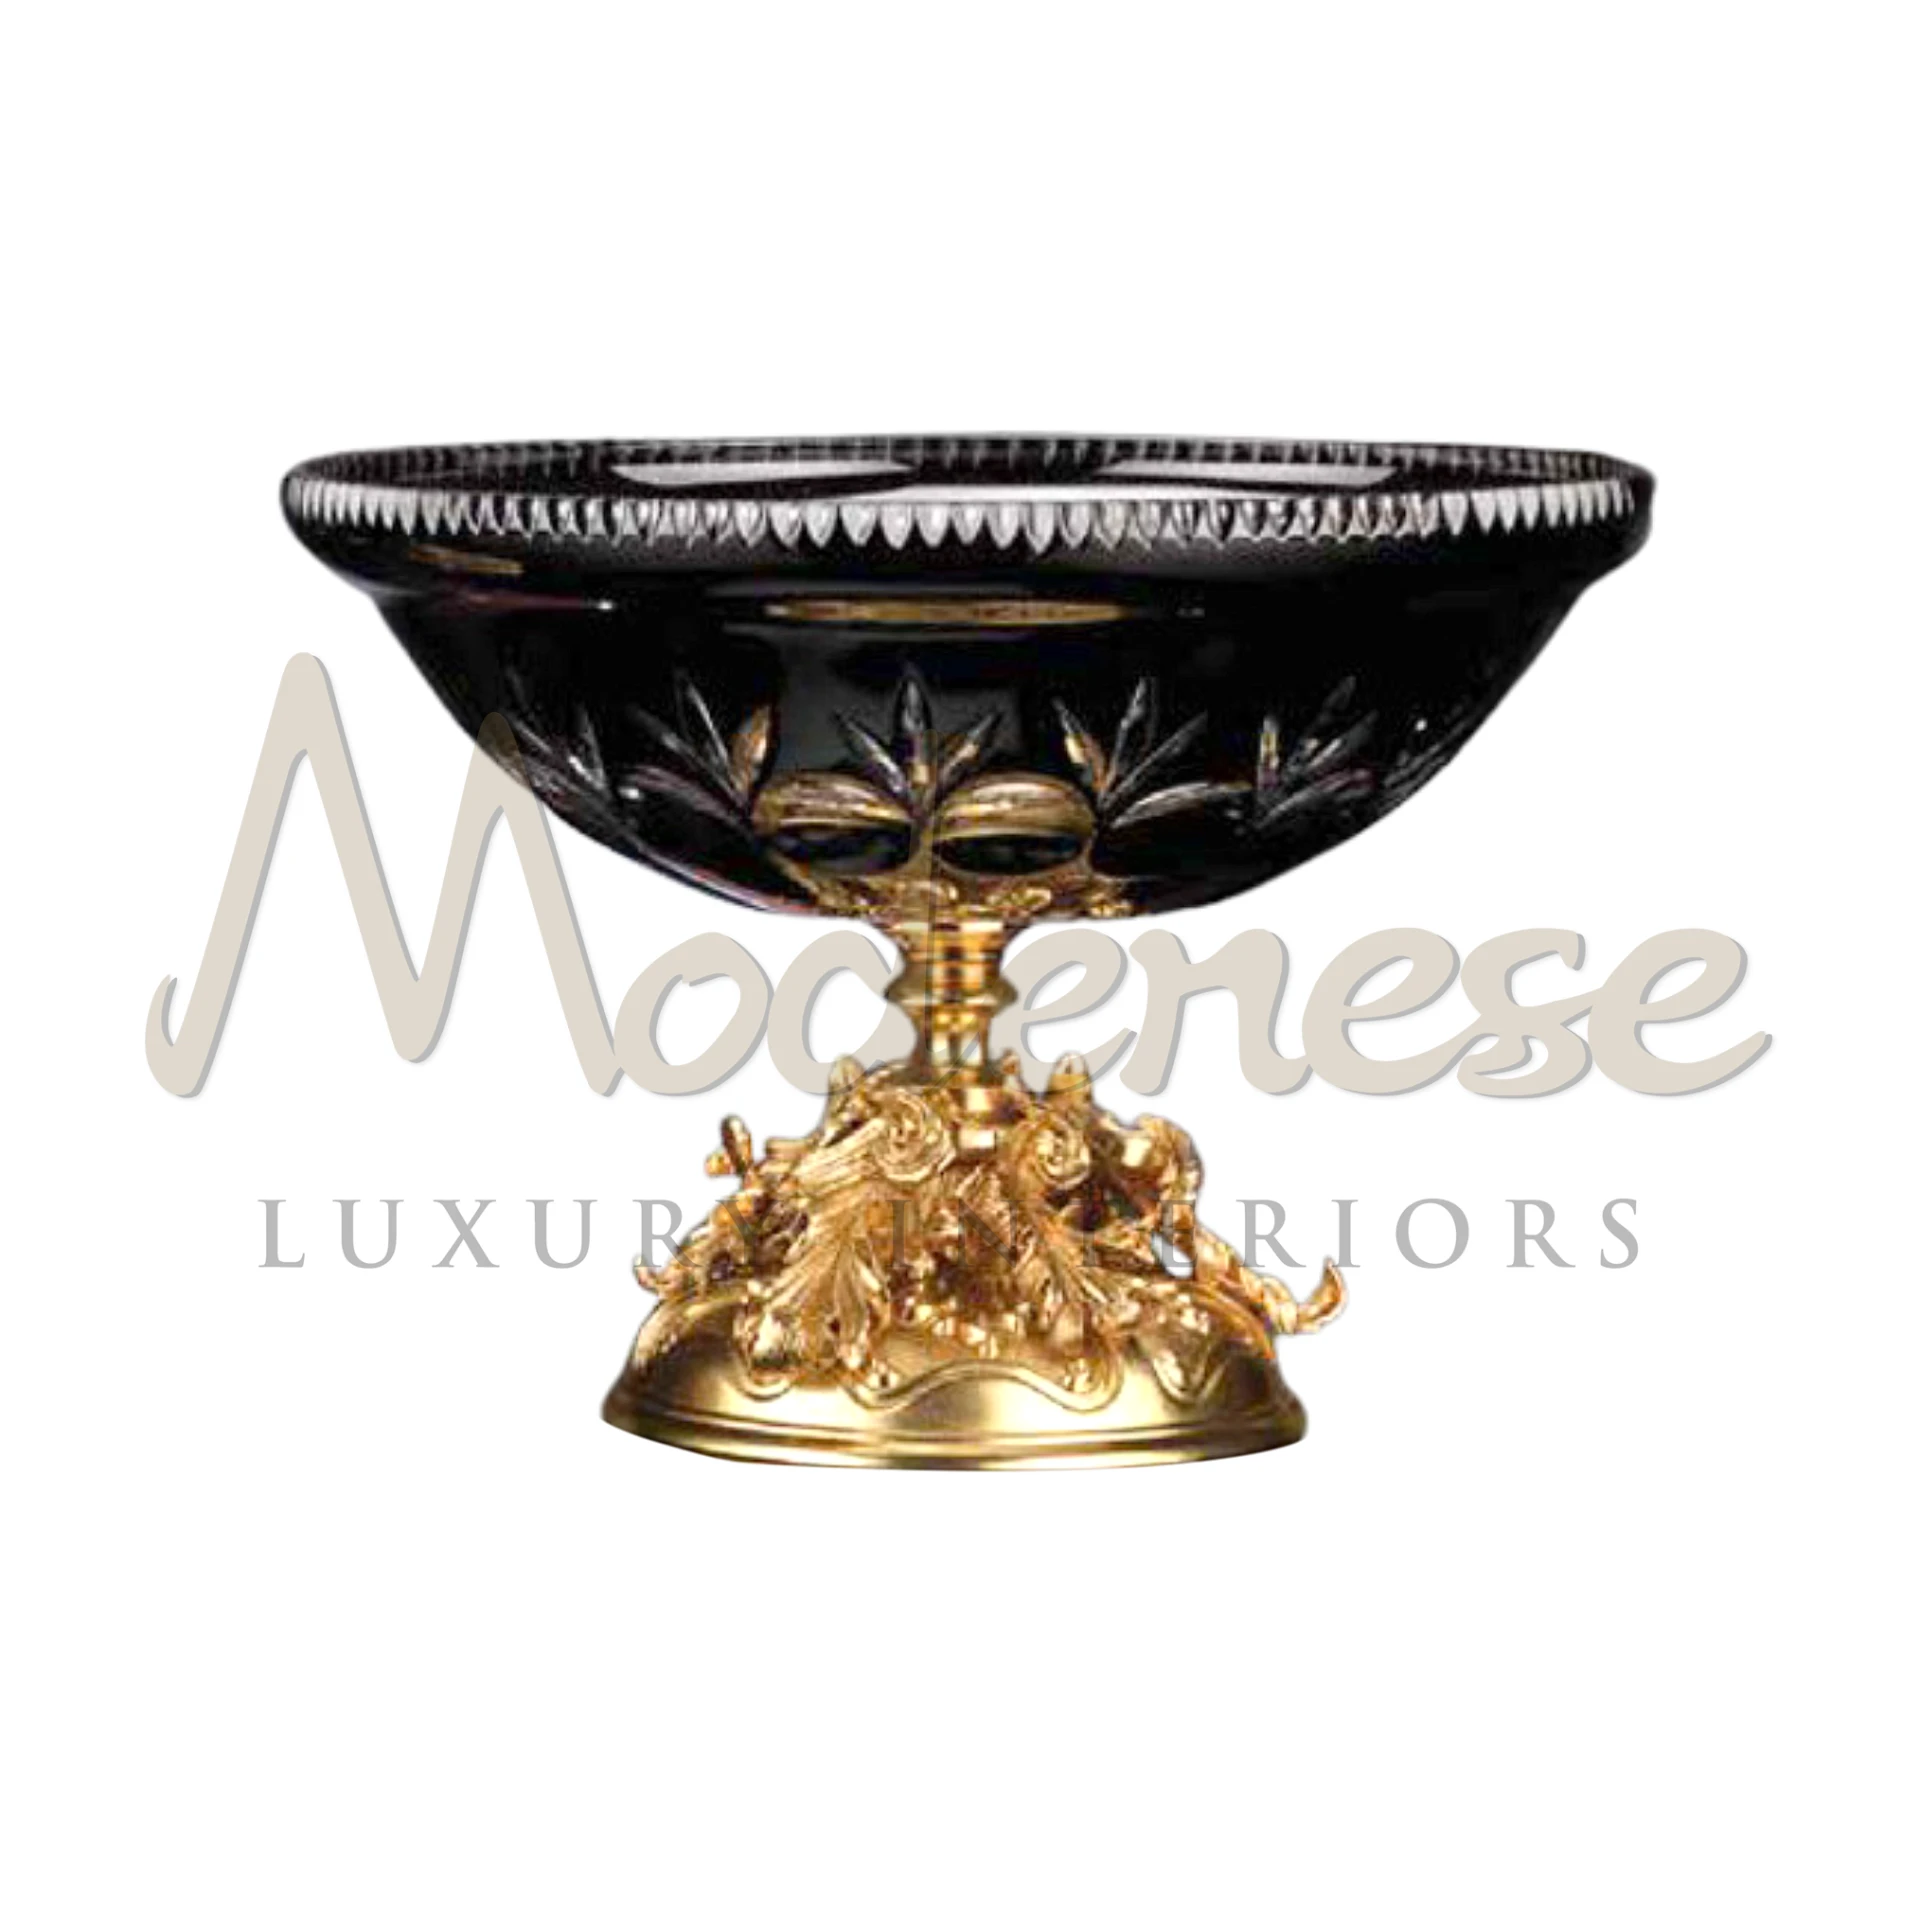 Victorian Pedestal Black Bowl in opaque glass with intricate carvings, a symbol of Victorian elegance, ideal for luxury interiors with a classic or baroque flair.






